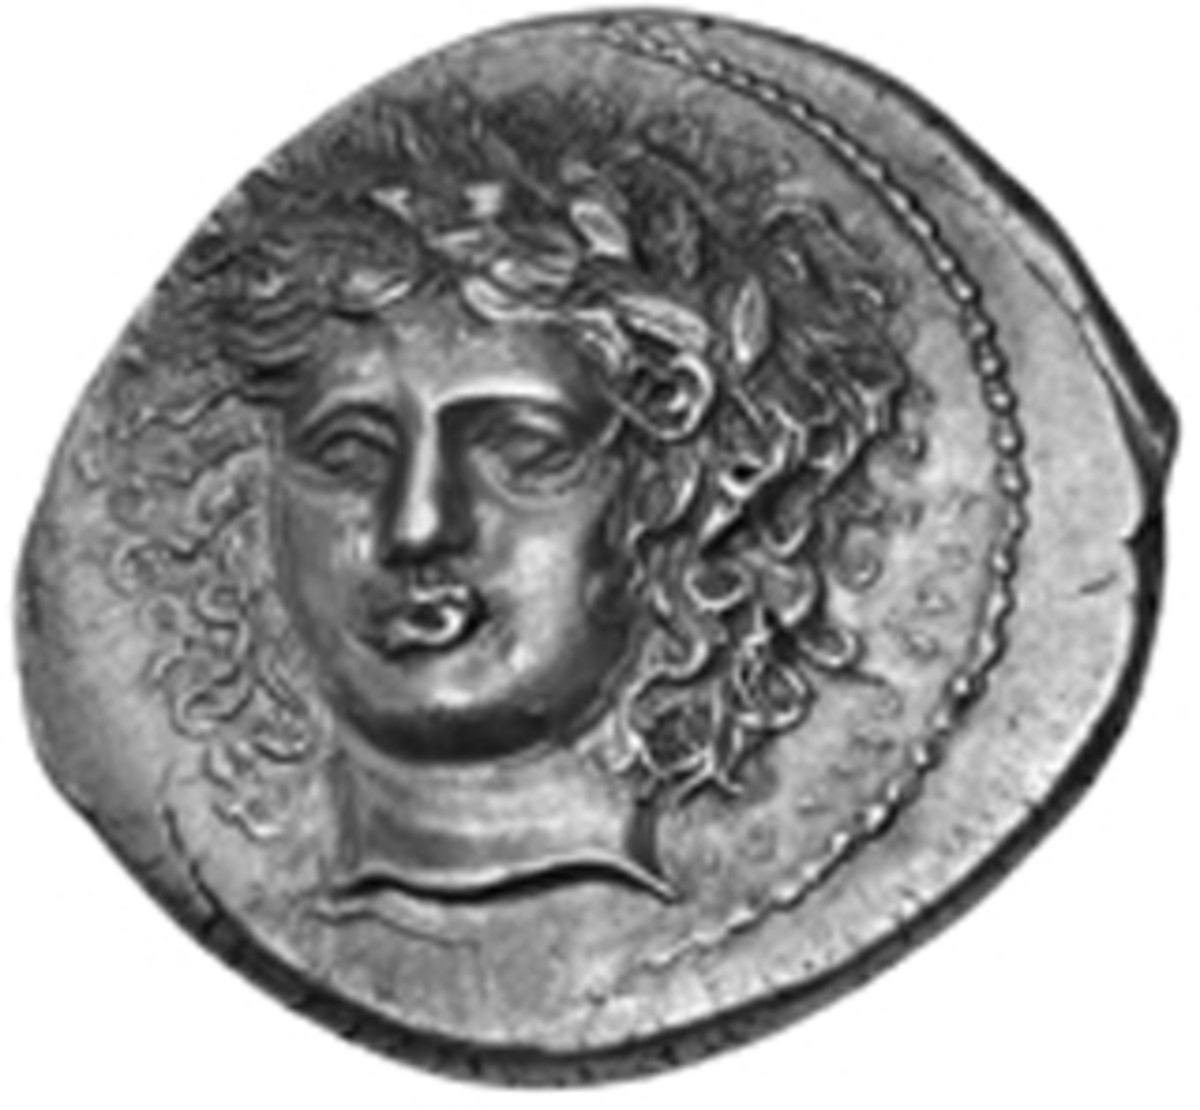 This rare ancient greek coin was seized at a coin show in 2012.